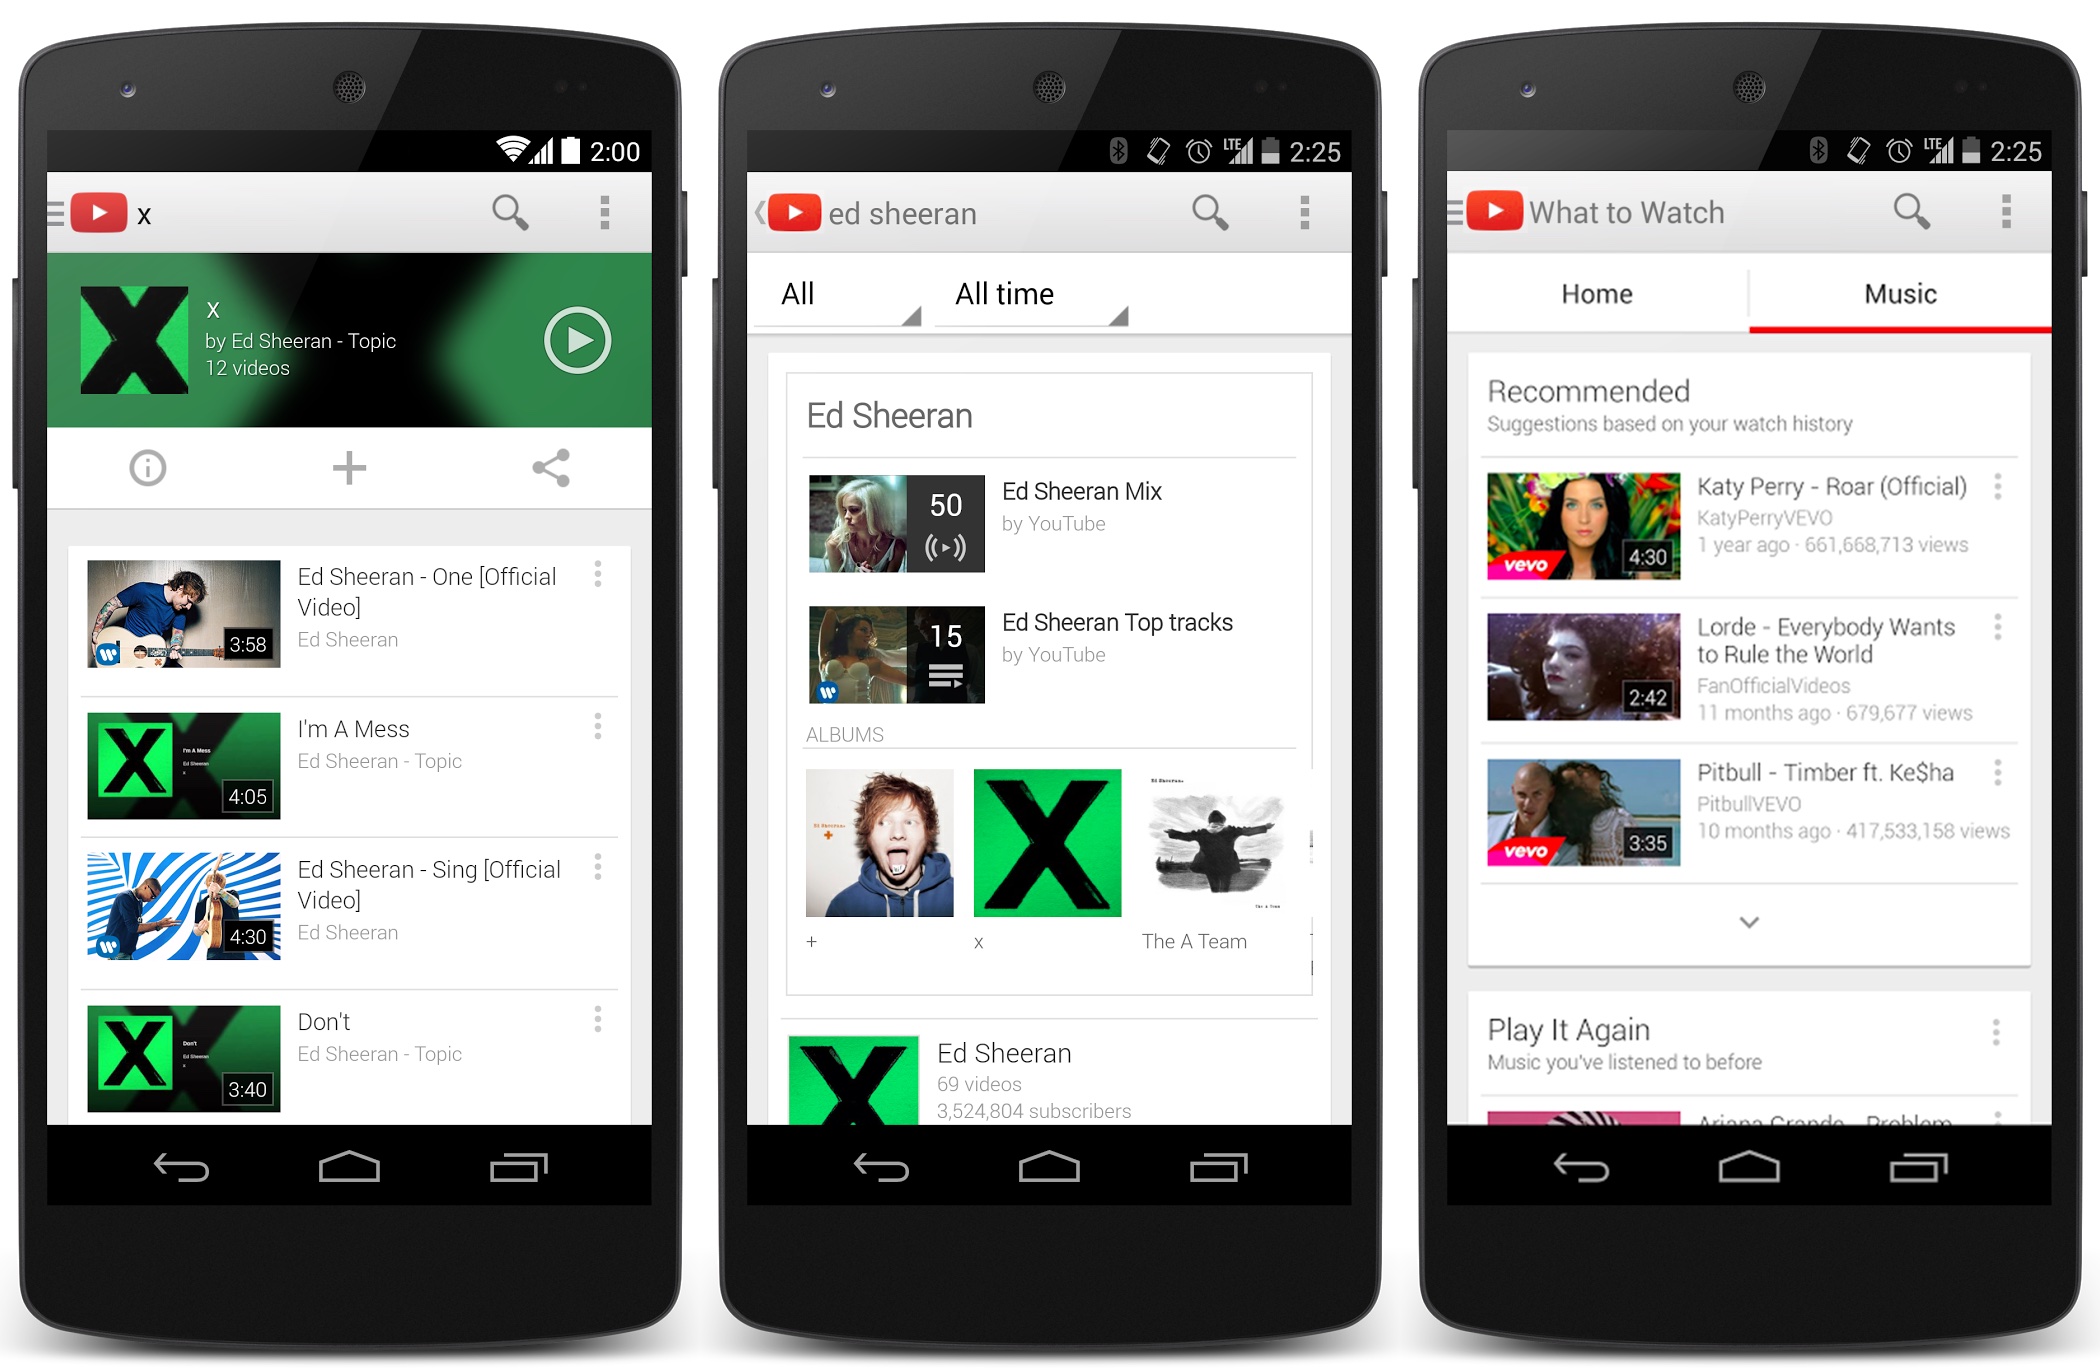 Spotify and Apple Music have finally met their biggest contender: YouTube Music. Image Credit: IDownloadBlog